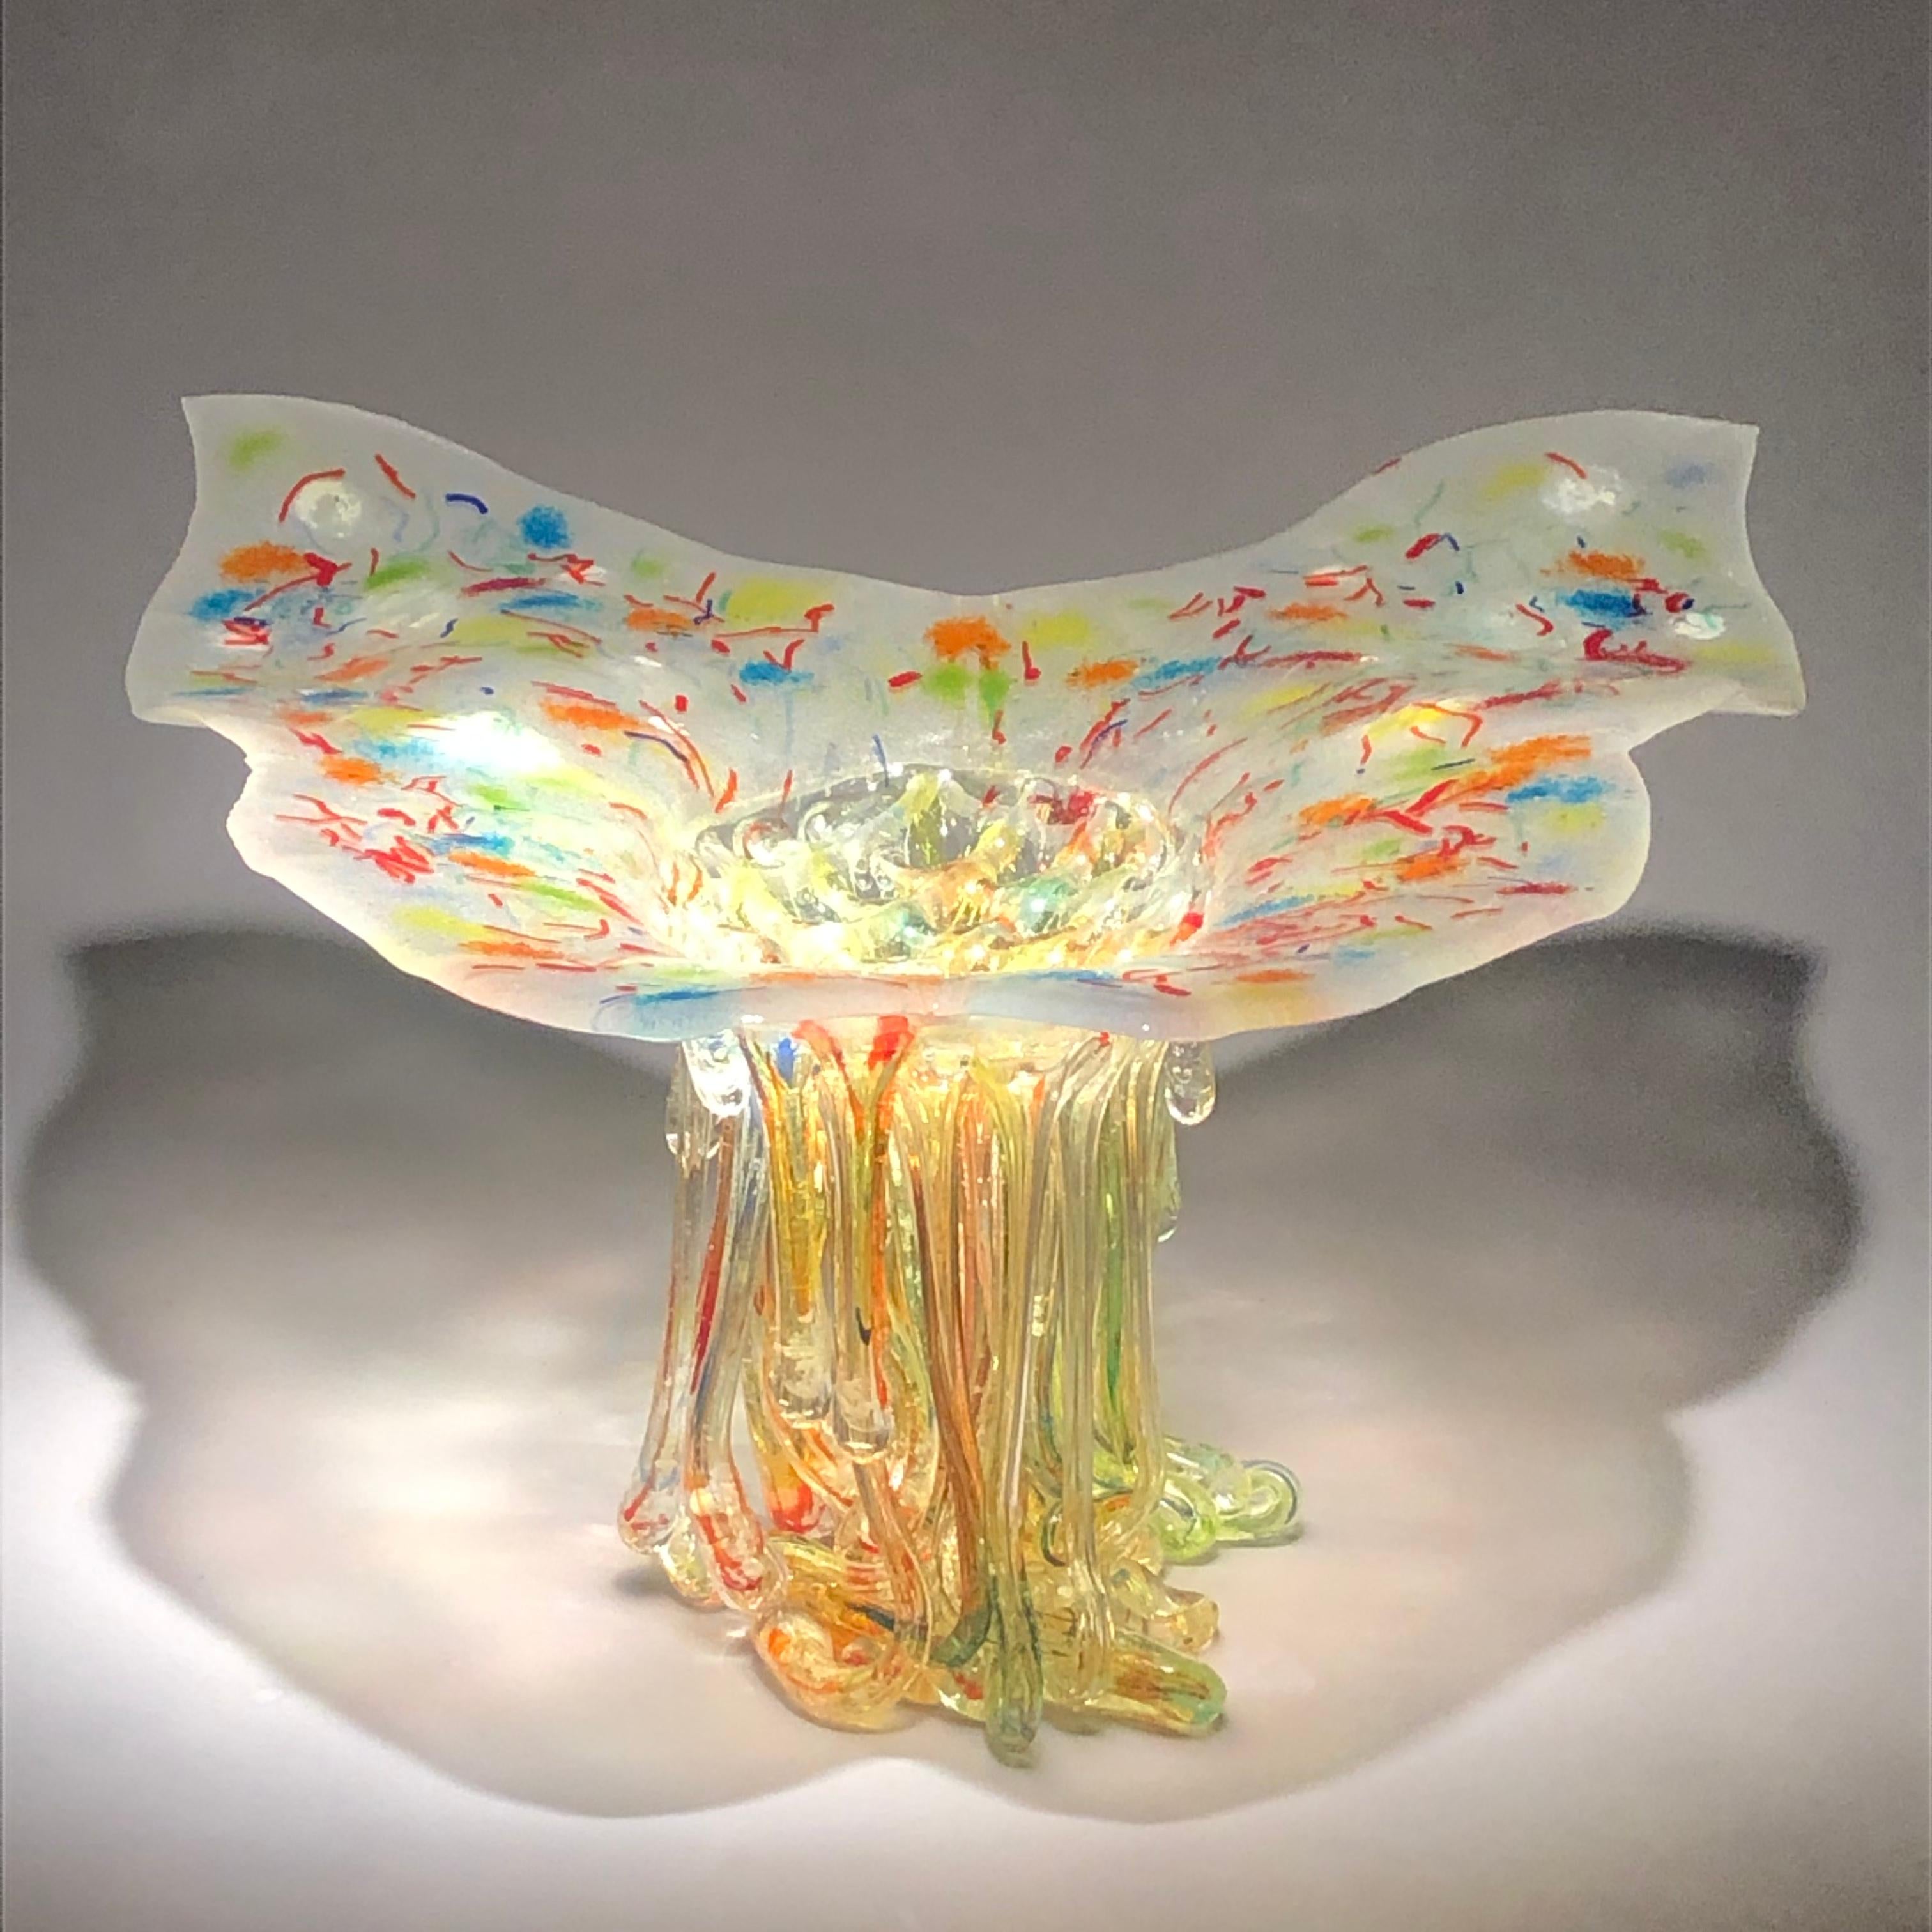 Hand-Crafted Butterfly Jellyfish, Murano Glass, Handmade in Italy, Contemporary Design, 2020 For Sale